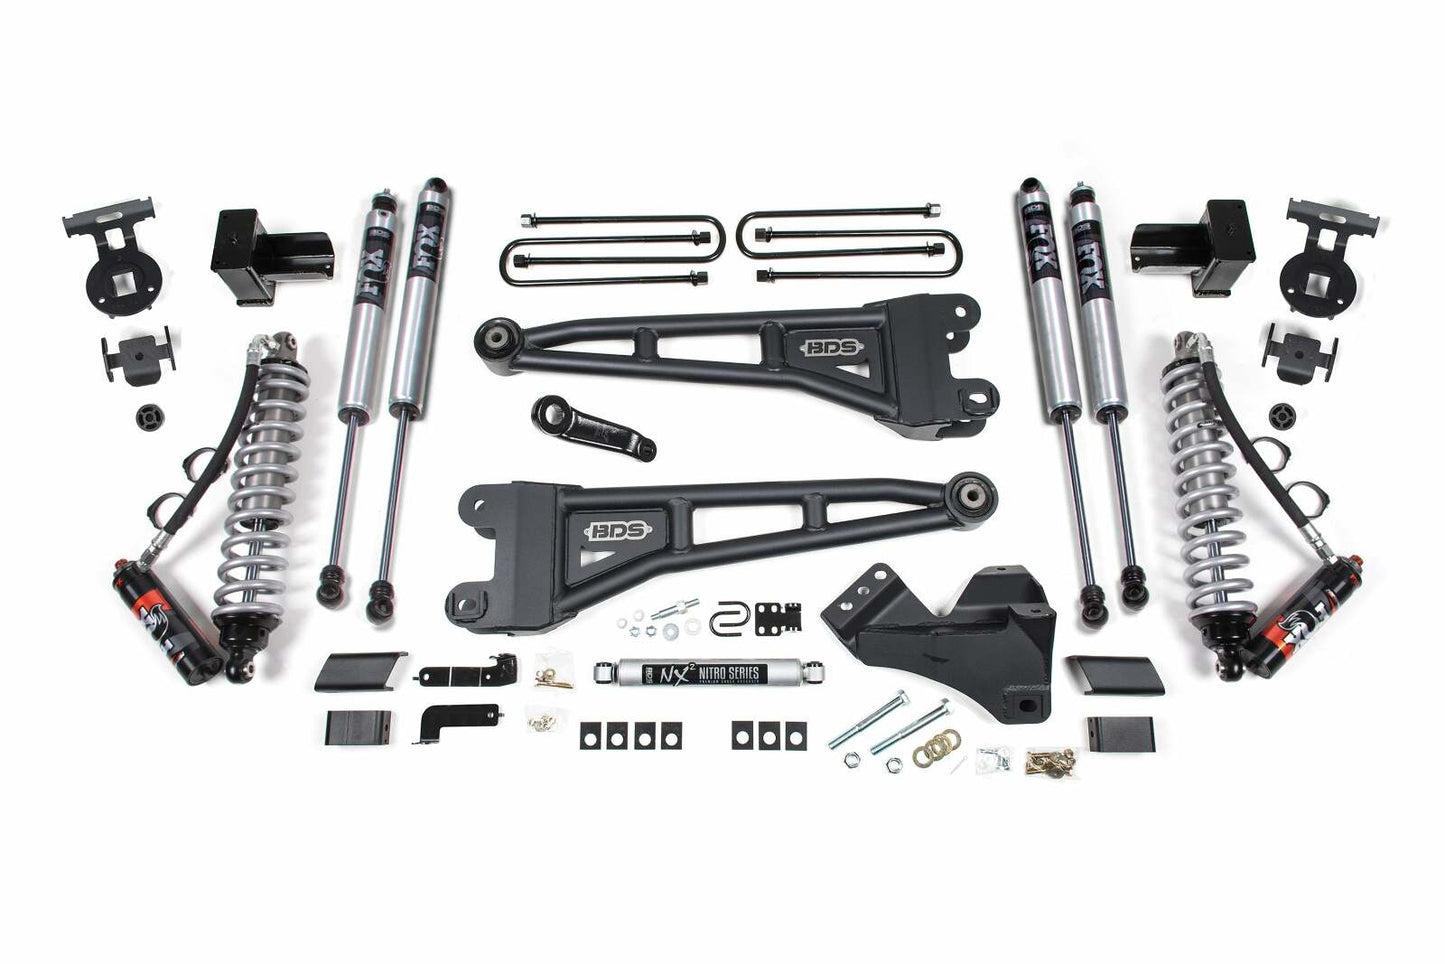 2020-2022 Ford F250/F350 4wd 5" Radius Arm Suspension Lift Kit, 3" Rear, Block, Diesel - Fox 2.5 PES C/O Front, Fox 2.0 IFP PS Aux Front, Fox 2.0 IFP PS Rear